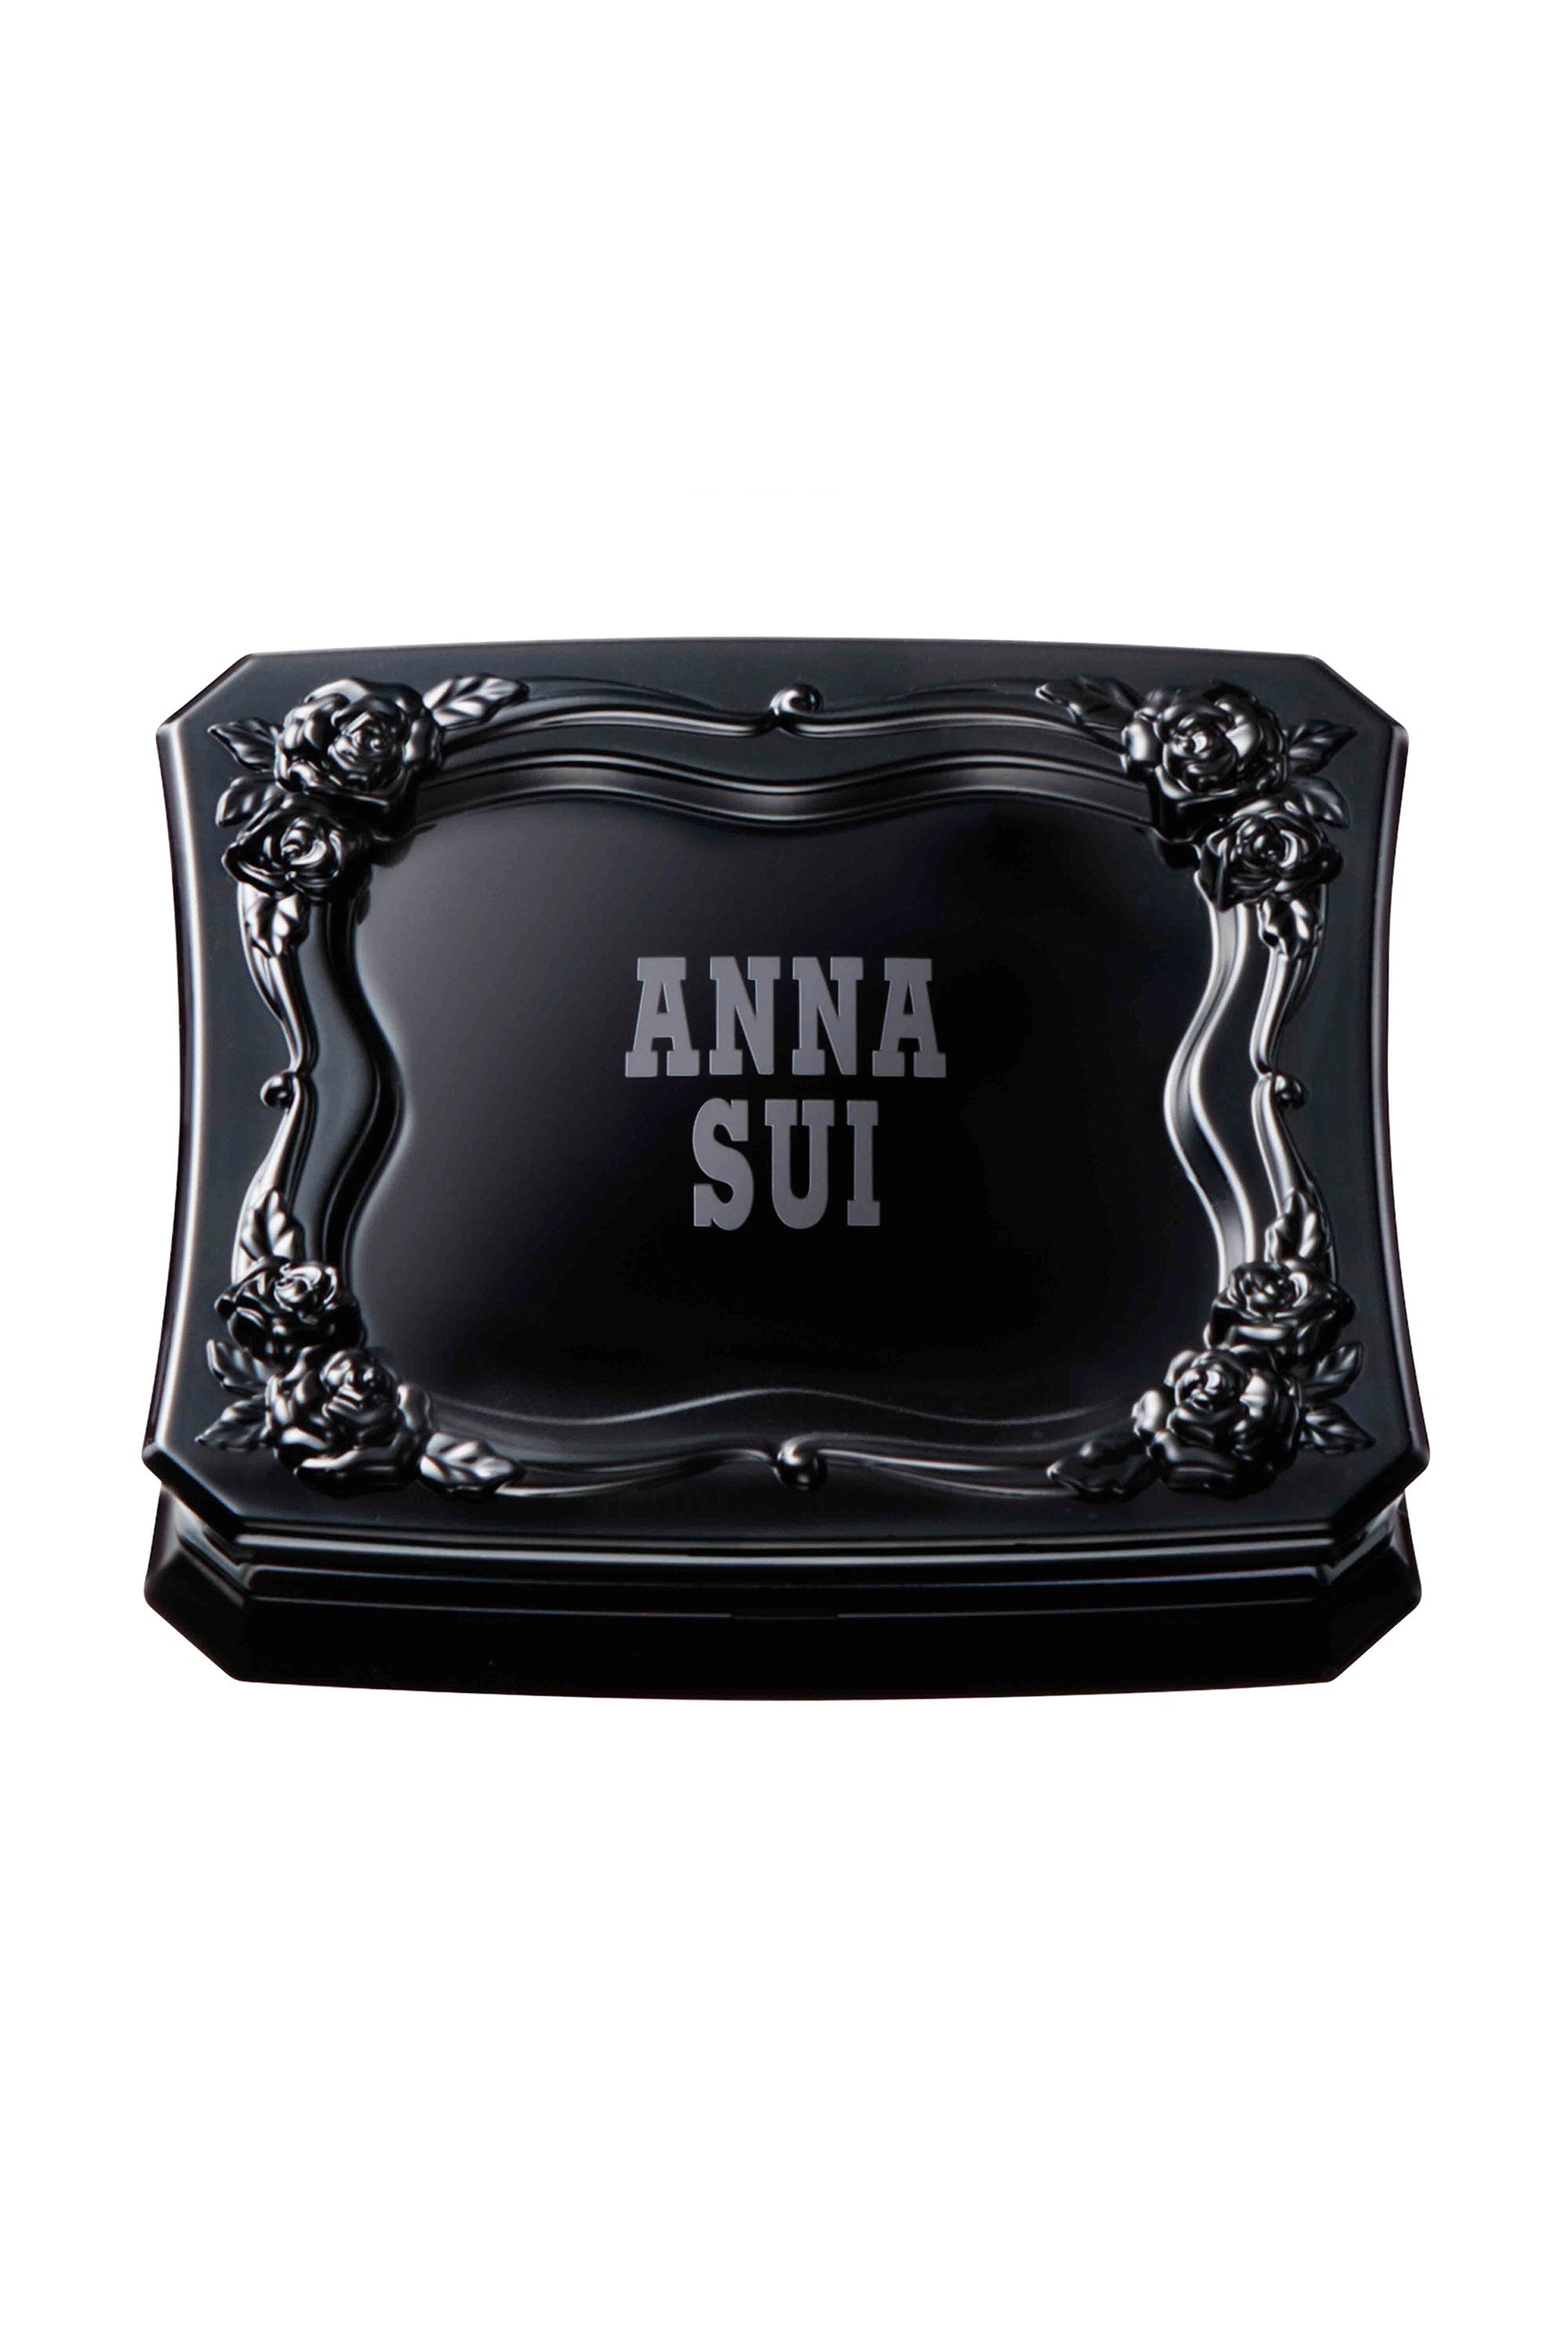 Eye Color Compact in black squared container and a roses pattern around the top lid, Anna Sui label in the middle